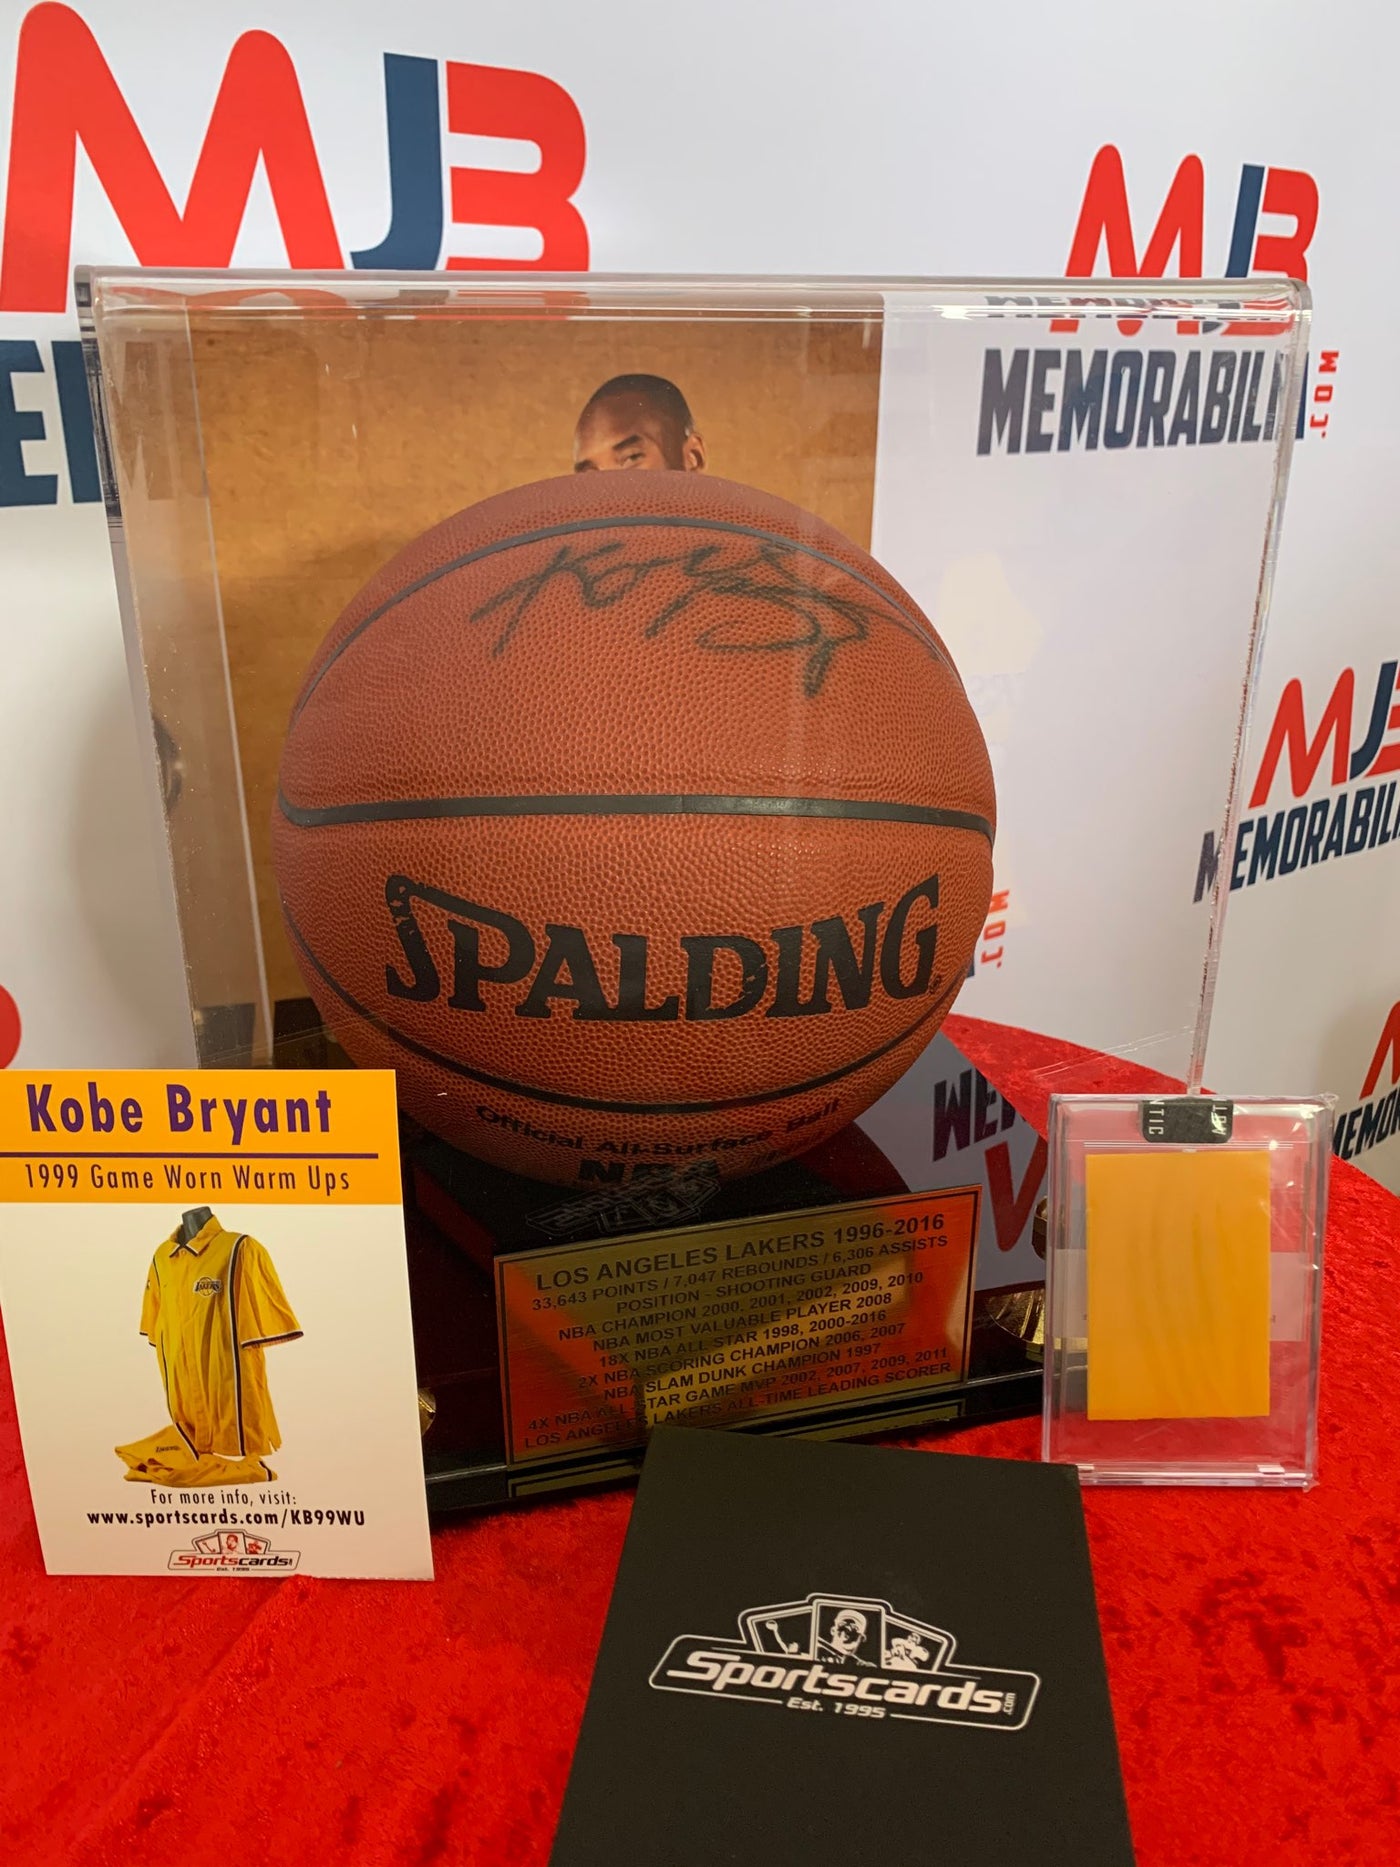 Kobe Bryant Signed NBA Basketball in Display case and 1999 Game Worn Warm ups Piece (Beckett and PSA COA)